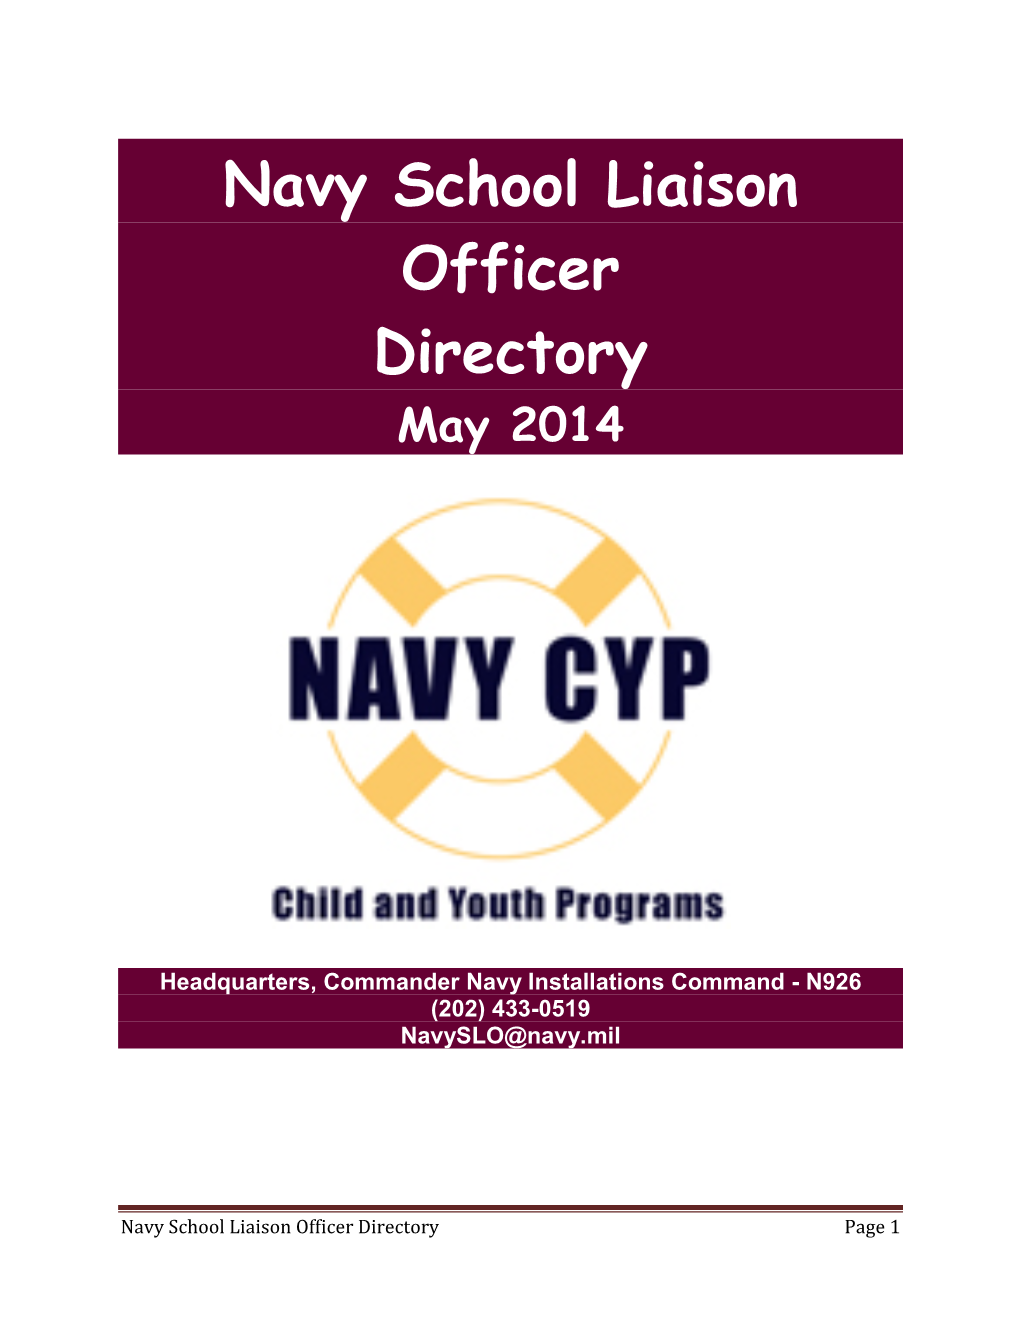 Navy School Liaison Officer Directory May 2014